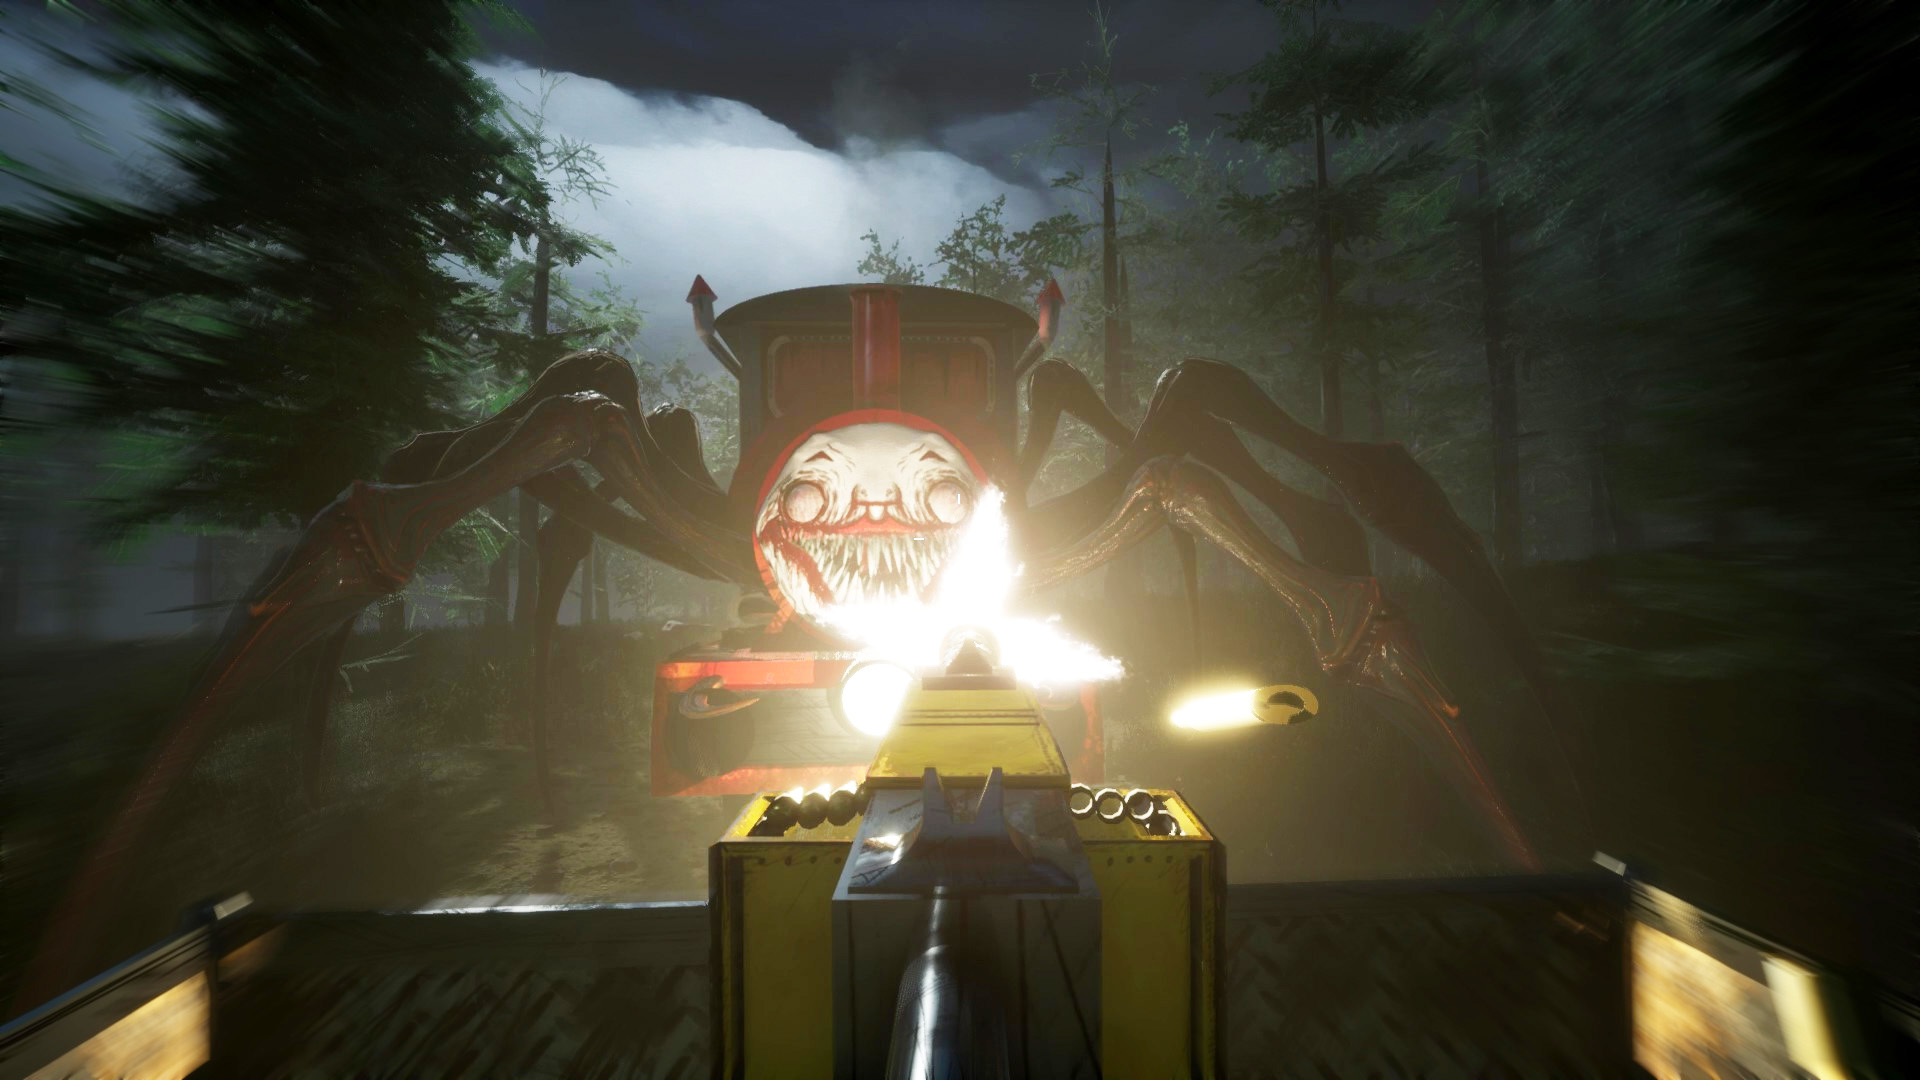  Fight a monstrous spider-train when Choo-Choo Charles releases this December 